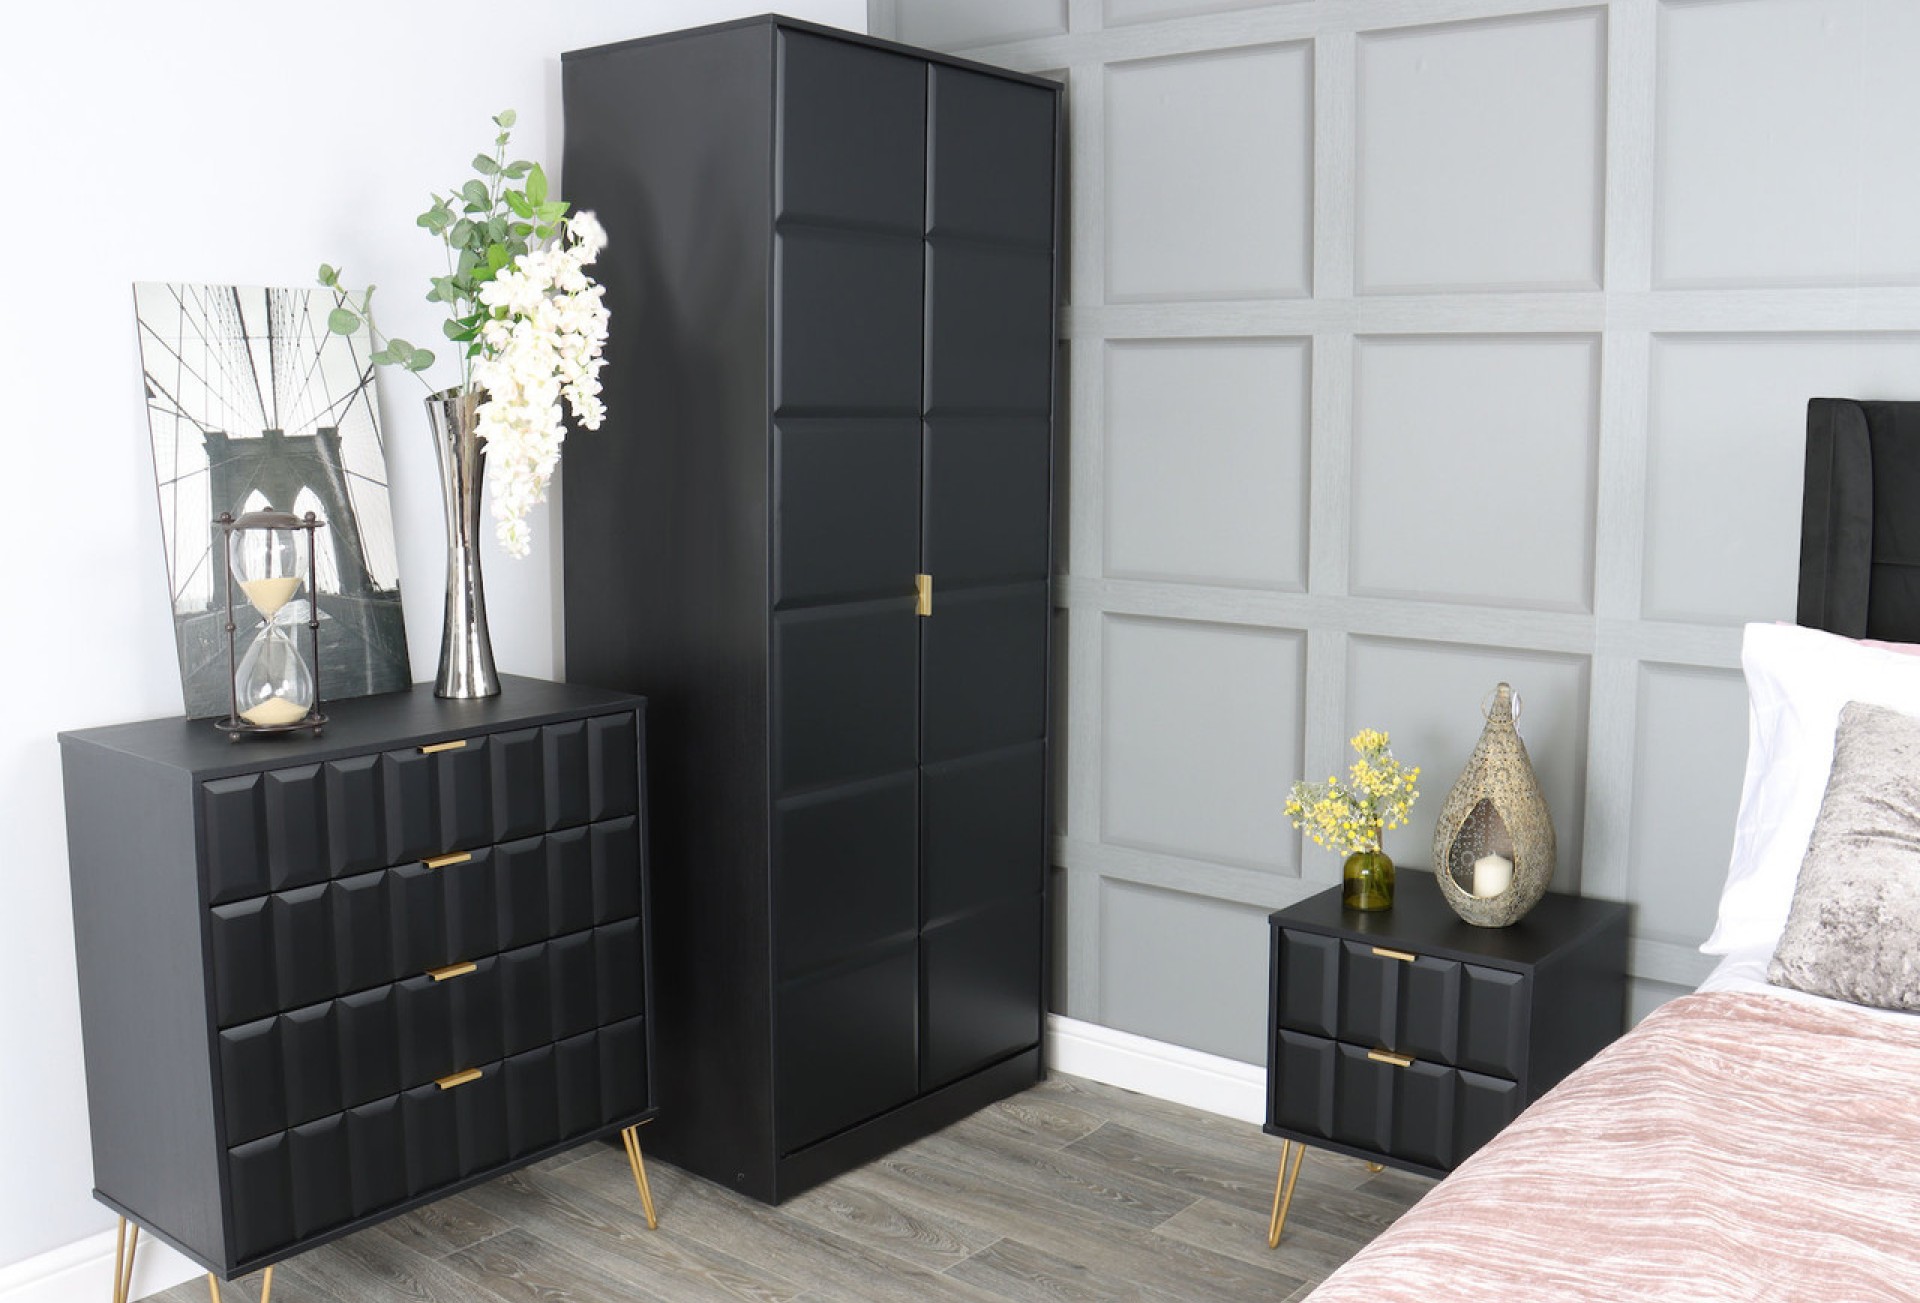 Cube bedroom wardrobe, bedside table, and chest of drawers collection in black